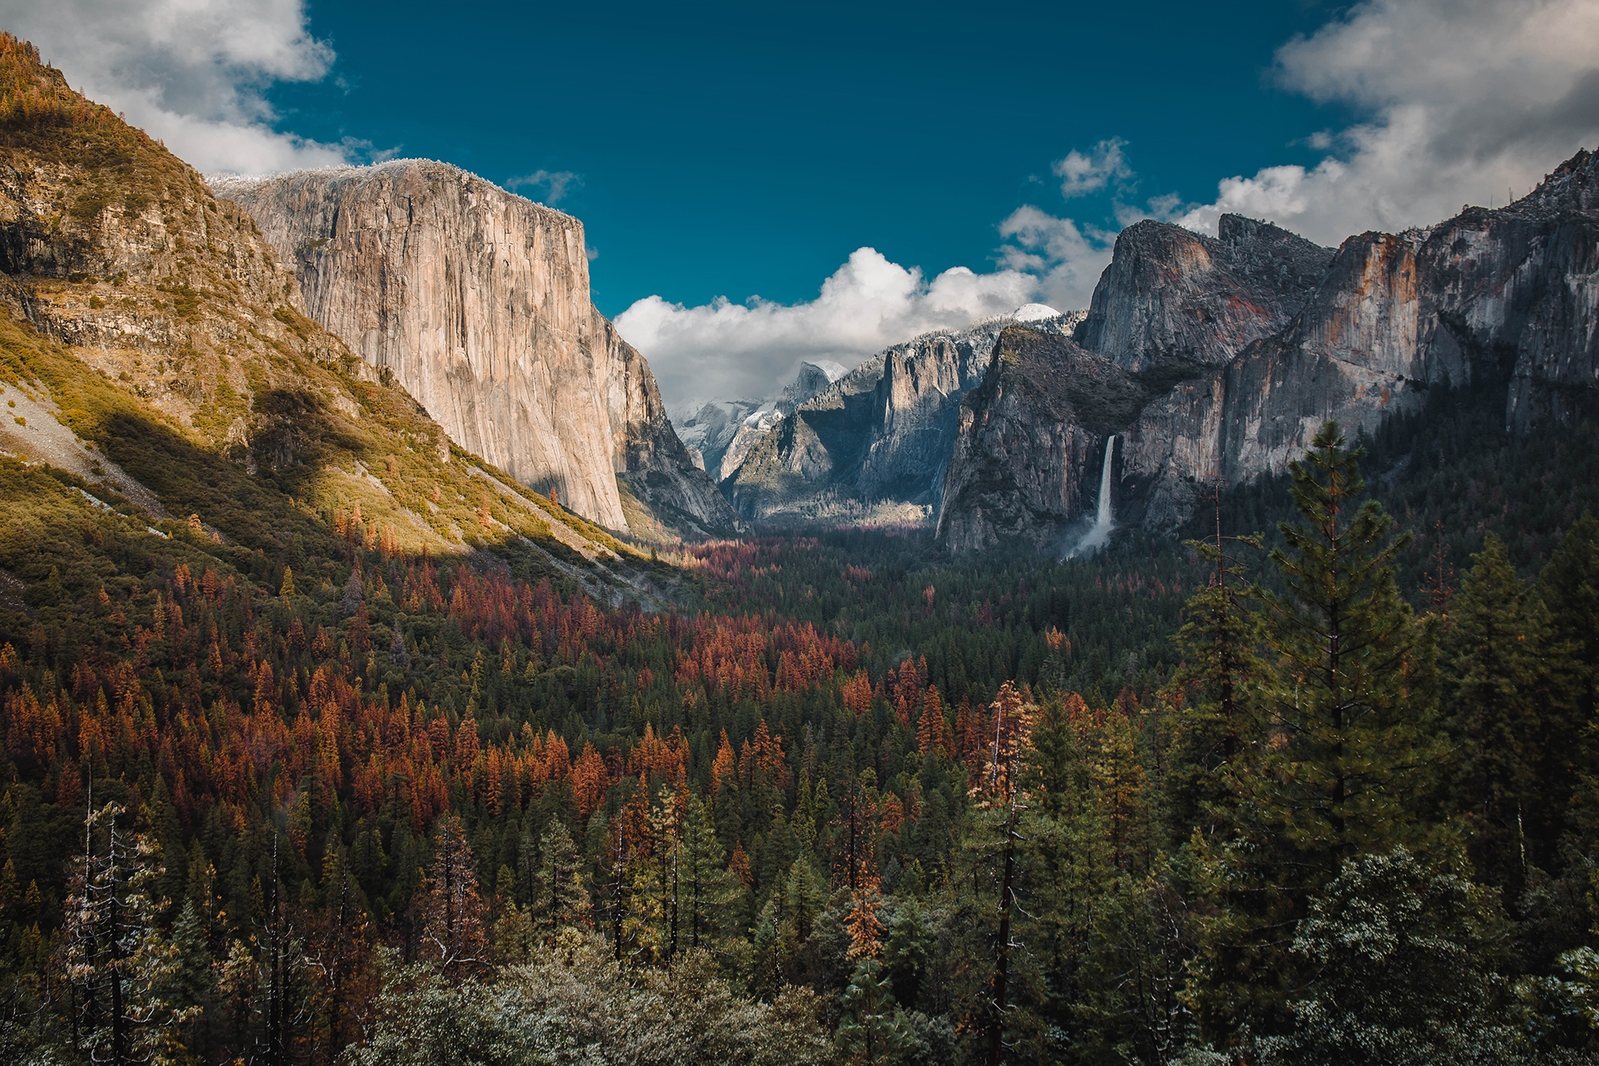 Image of Yosemite Valley (Tunnel View) by Ryan Smith